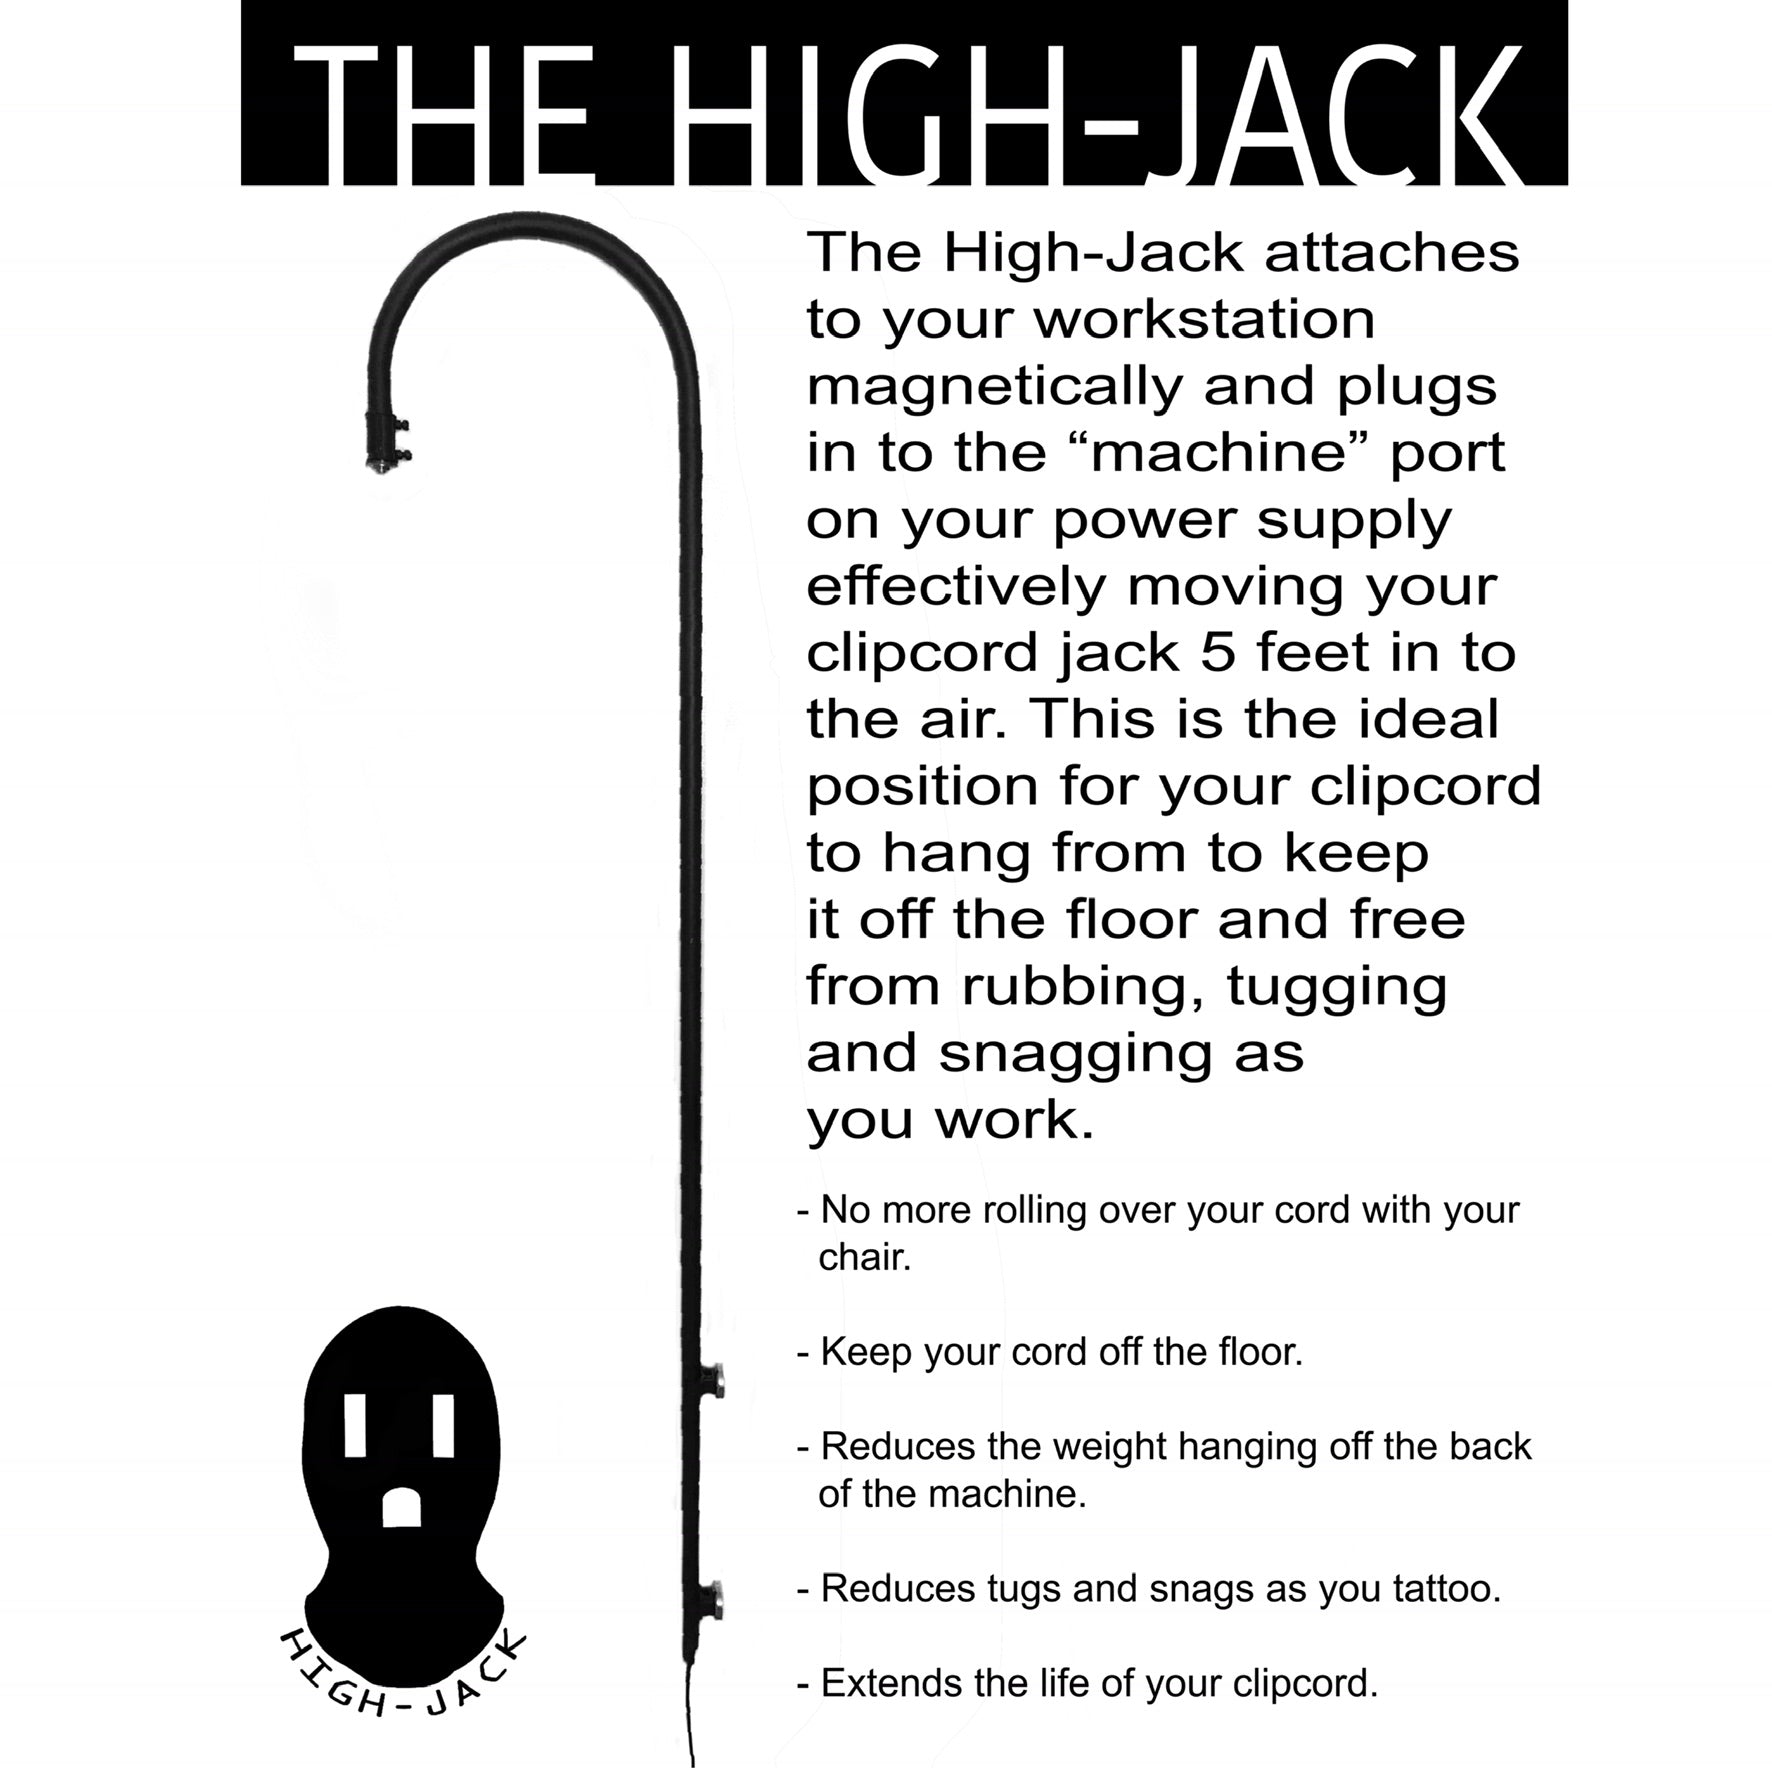 The High-Jack by Joshua Bowers - Magnetic Power Bracket